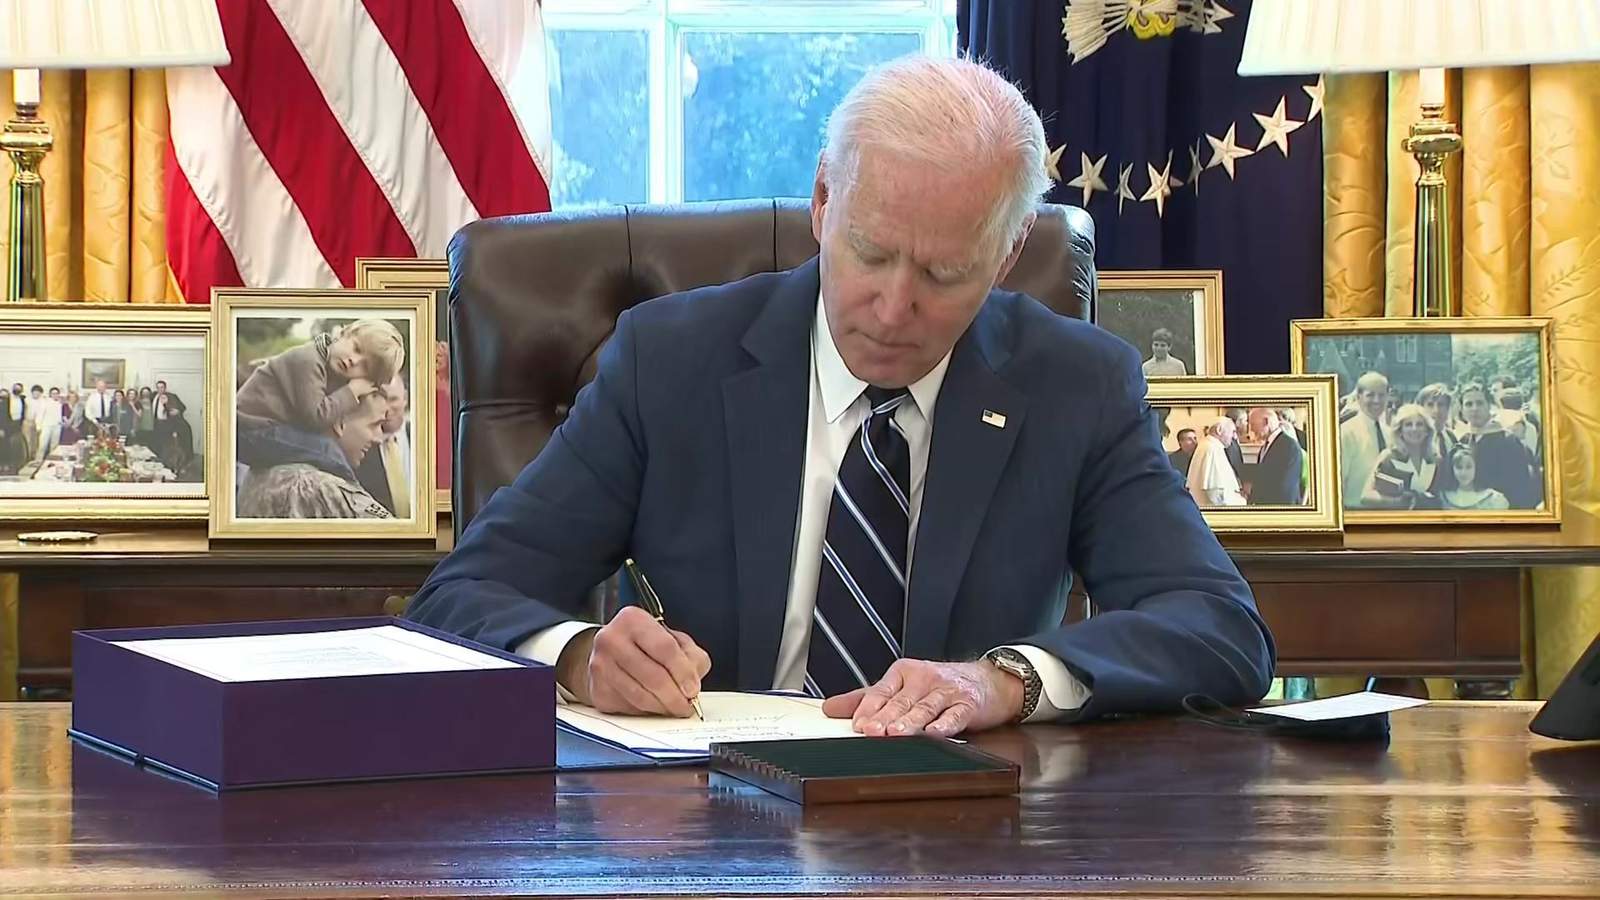 President Joe Biden signs $1.9T relief bill into law ahead of prime-time address